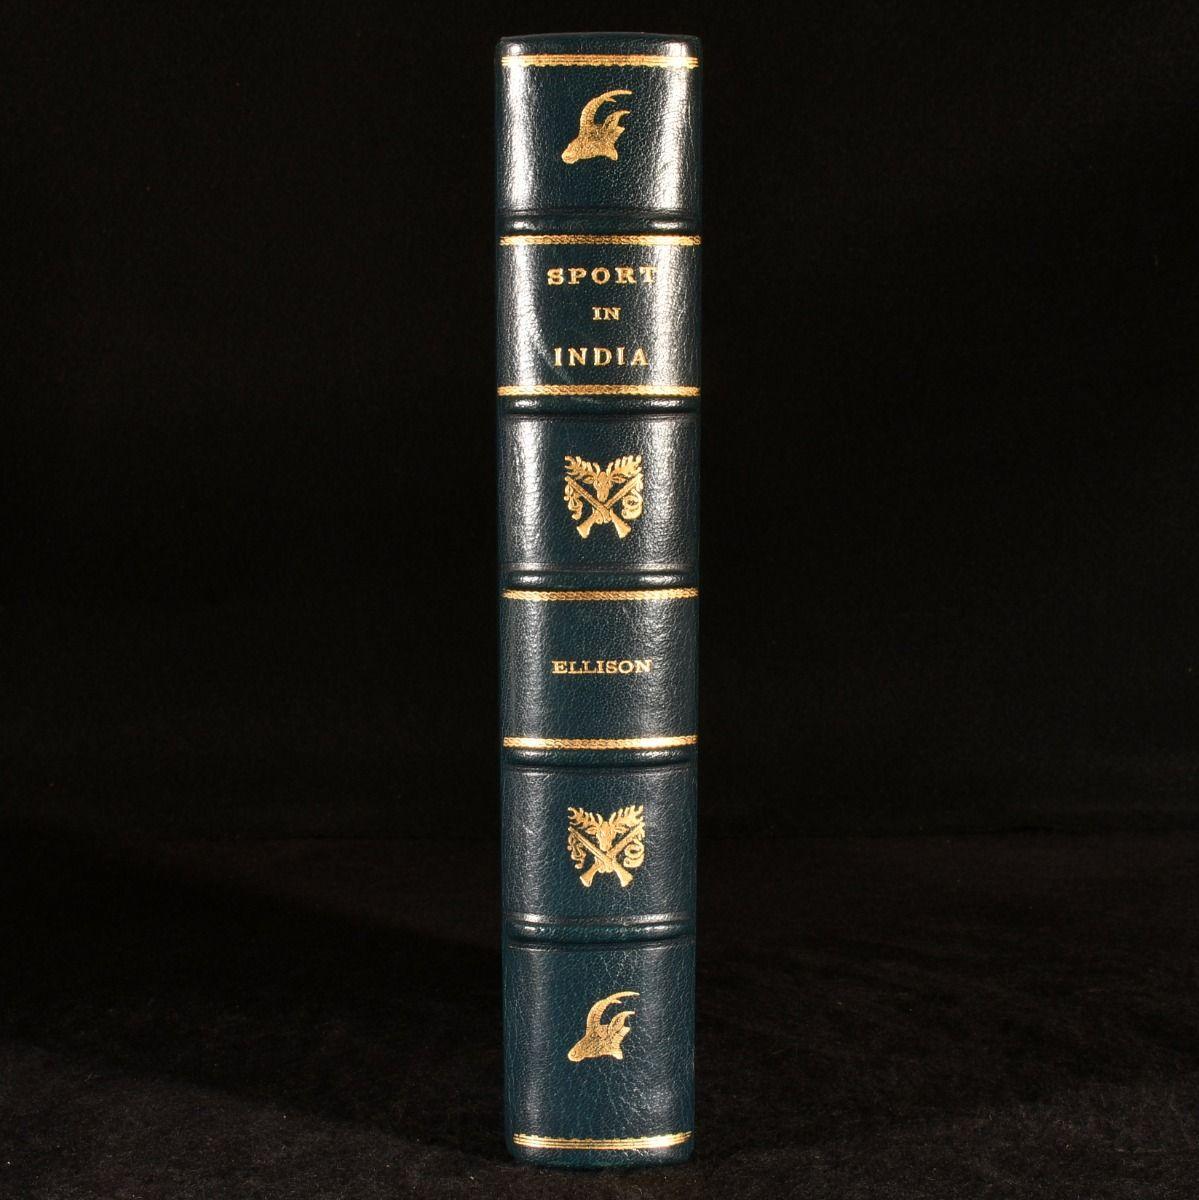 A handsomely bound first edition of this highly illustrated work regarding Edward VIII's sporting expedition to India.

The first edition of the work.

Sumptuously rebound in half morocco. Endpapers and blanks renewed. Half title has been